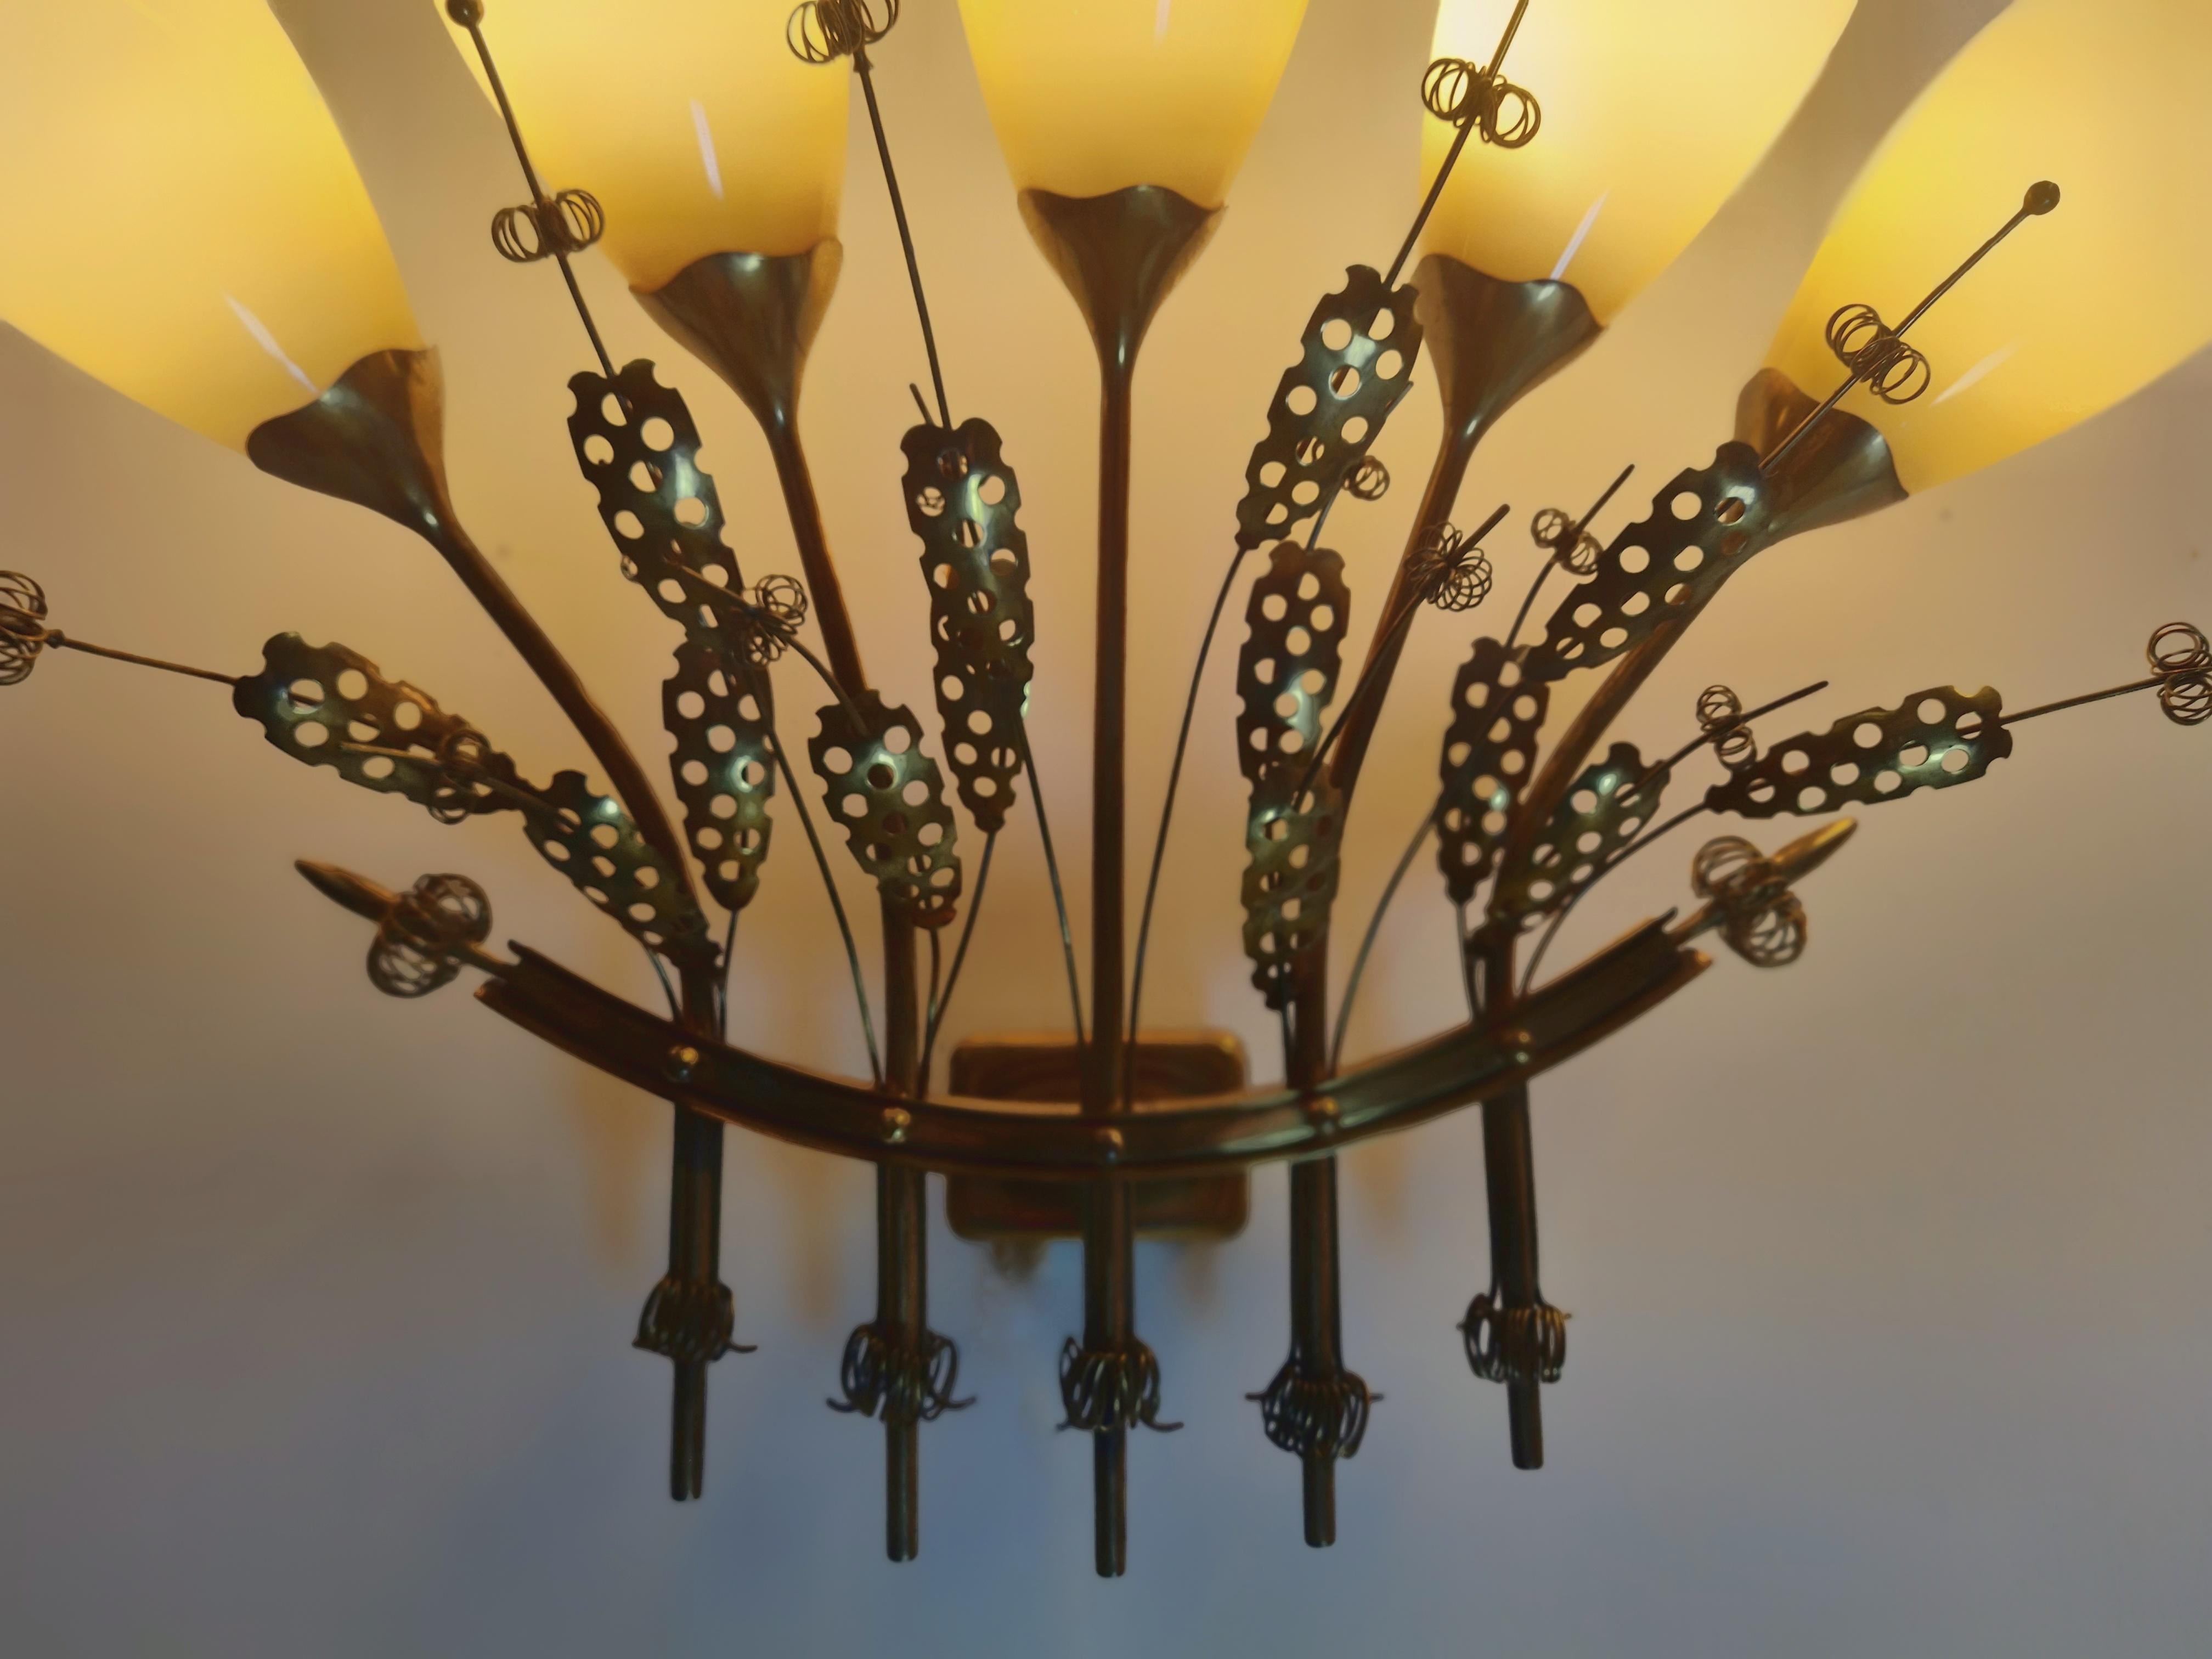 A Pair of Impressive Paavo Tynell Commissioned Wall Lamps, Taito c. 1950s For Sale 4